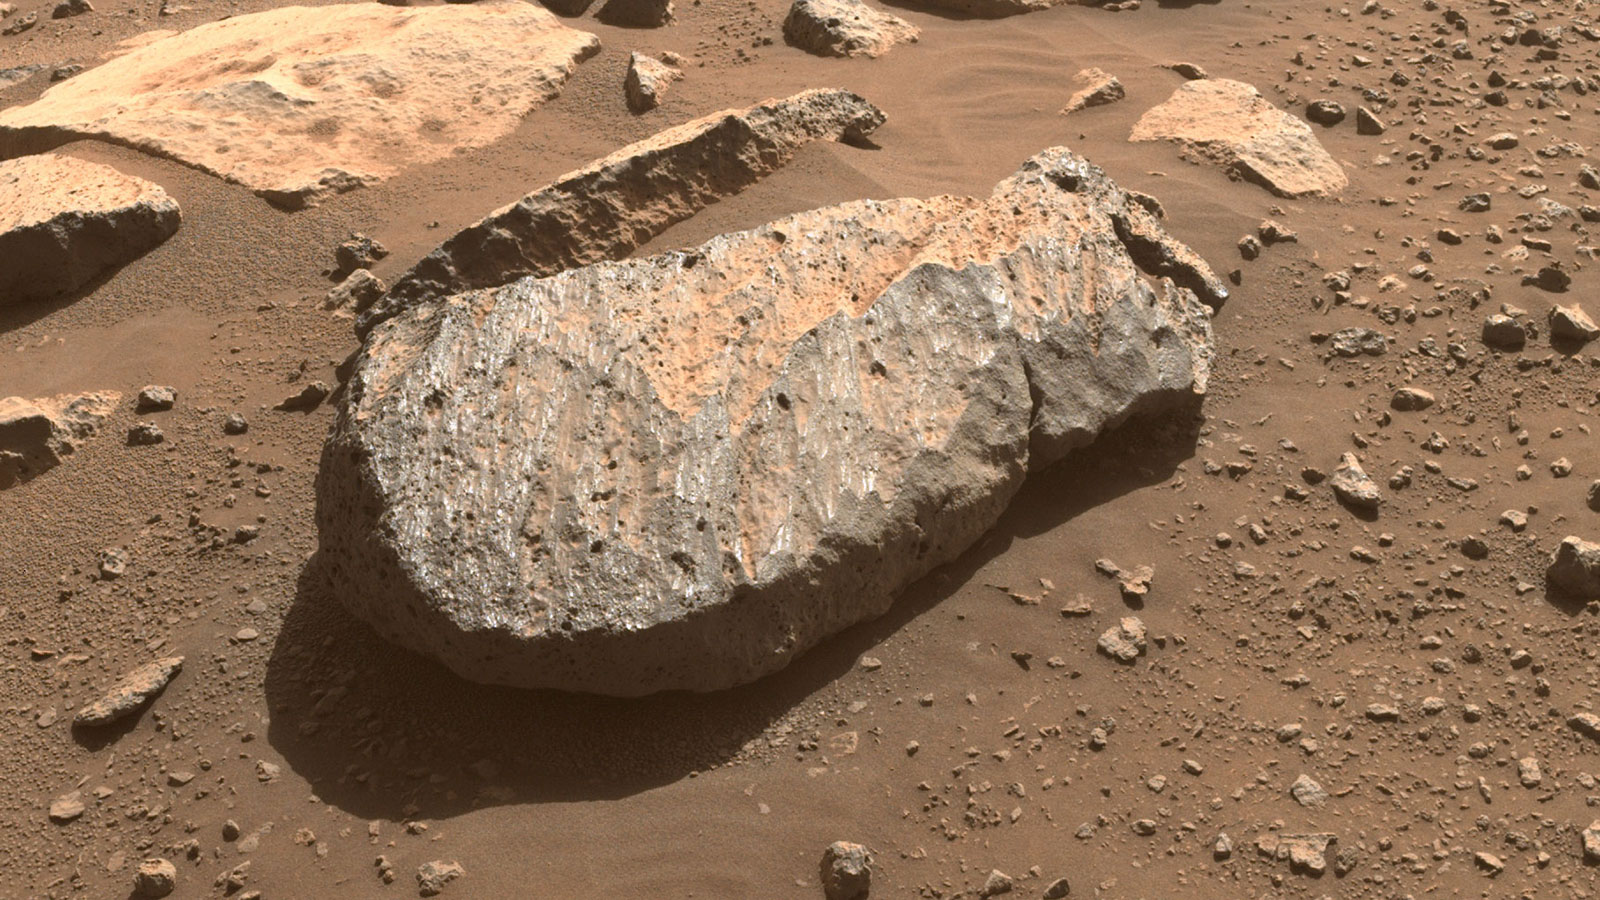 A close-up of the rock, nicknamed “Rochette,” that the Perseverance science team will examine in order to determine whether to take a rock core sample from it.